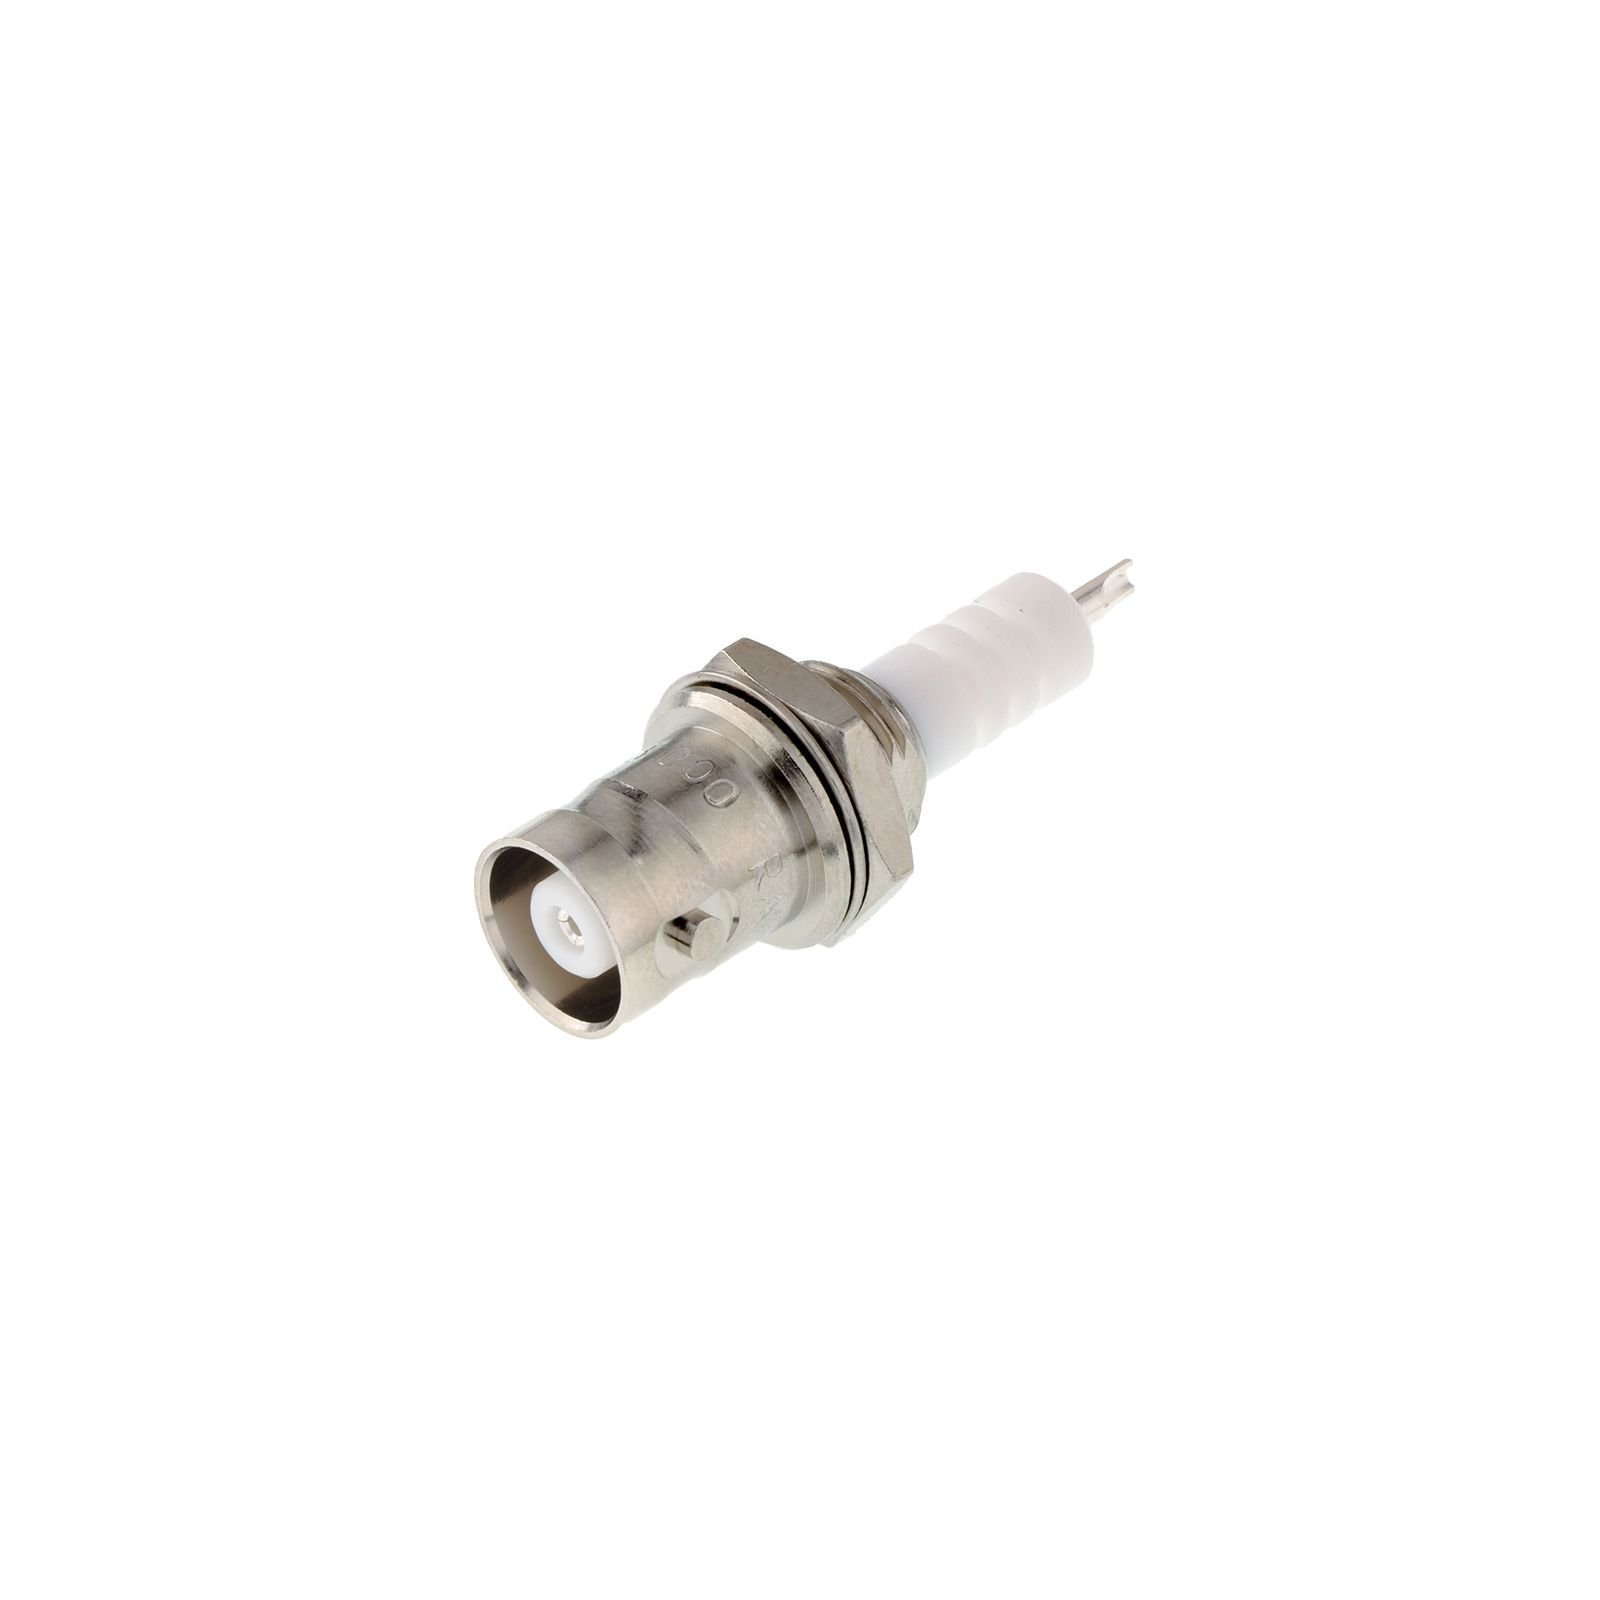 https://cdn.radiall.com/media/foxycom_imageresizer/cache/catalog/category/product_pages/rf_coaxial_connectors/1600x1600_co_ar_tr_fr_bc_85/coax_R316553000.jpg